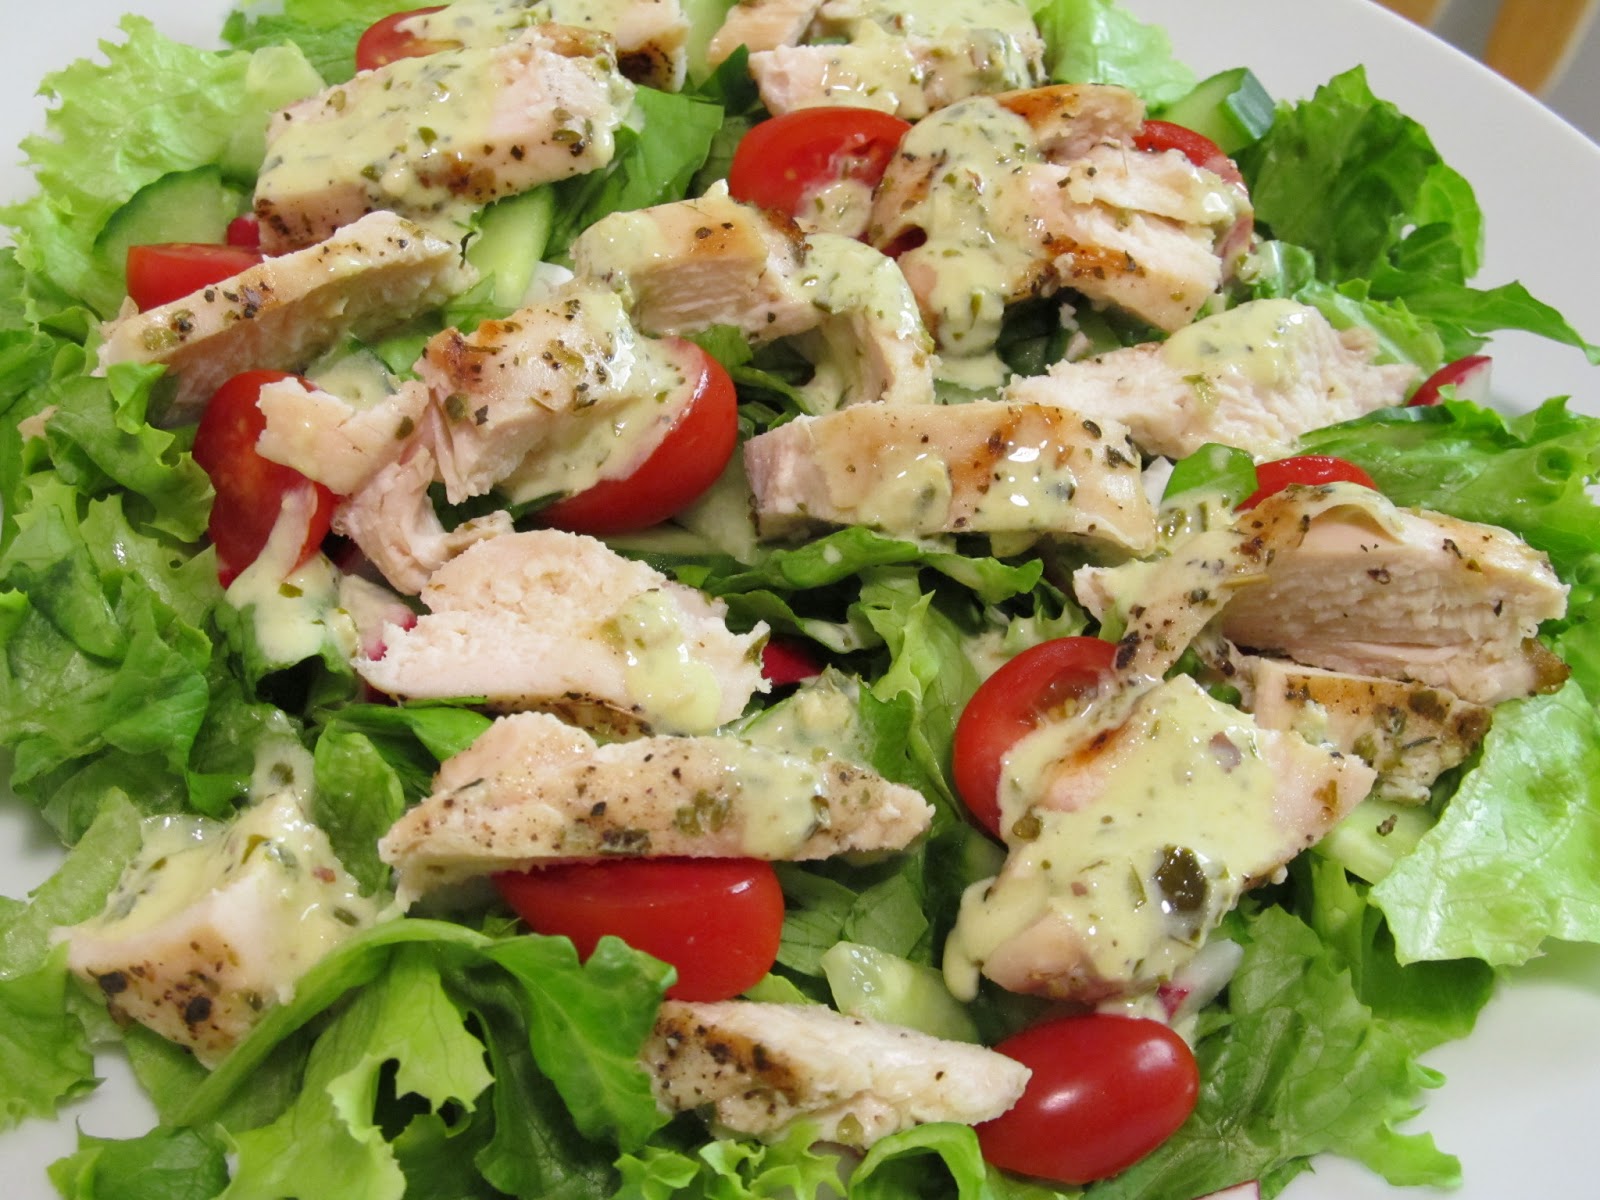 Jenn's Food Journey: Italian Chopped Salad with Grilled Chicken